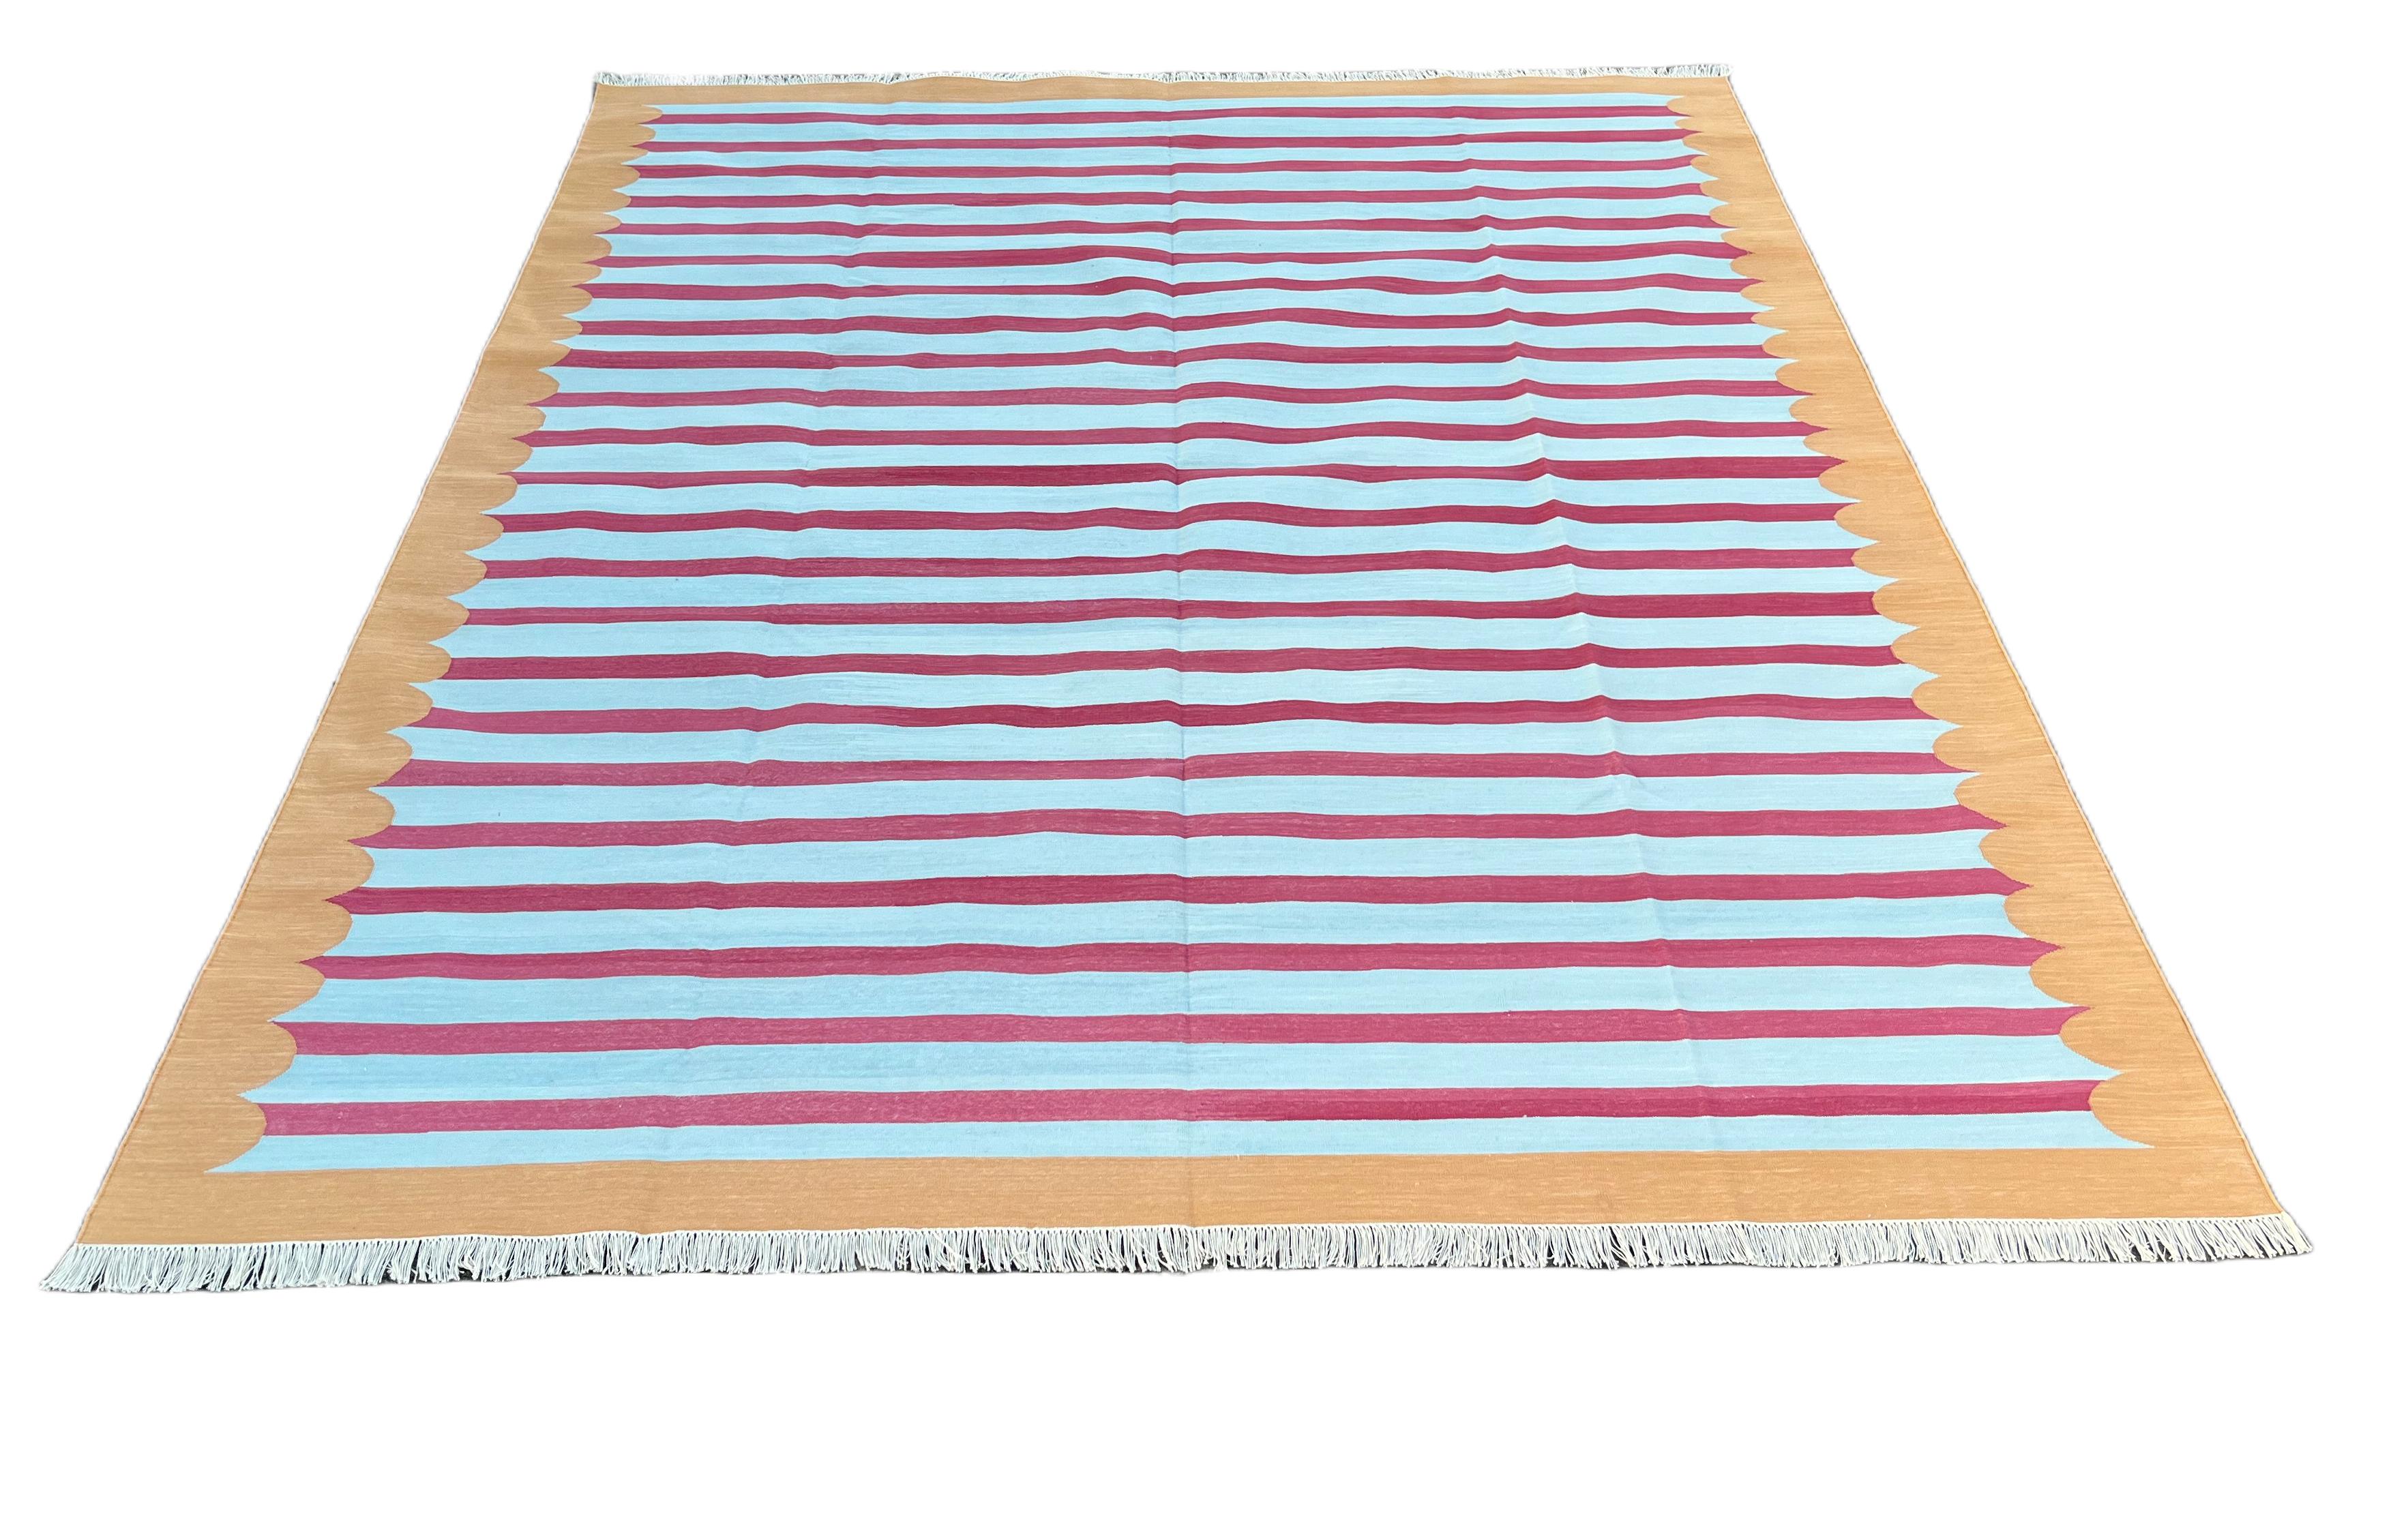 Hand-Woven Handmade Cotton Area Flat Weave Rug, 8x10 Blue, Tan, Pink Striped Indian Dhurrie For Sale